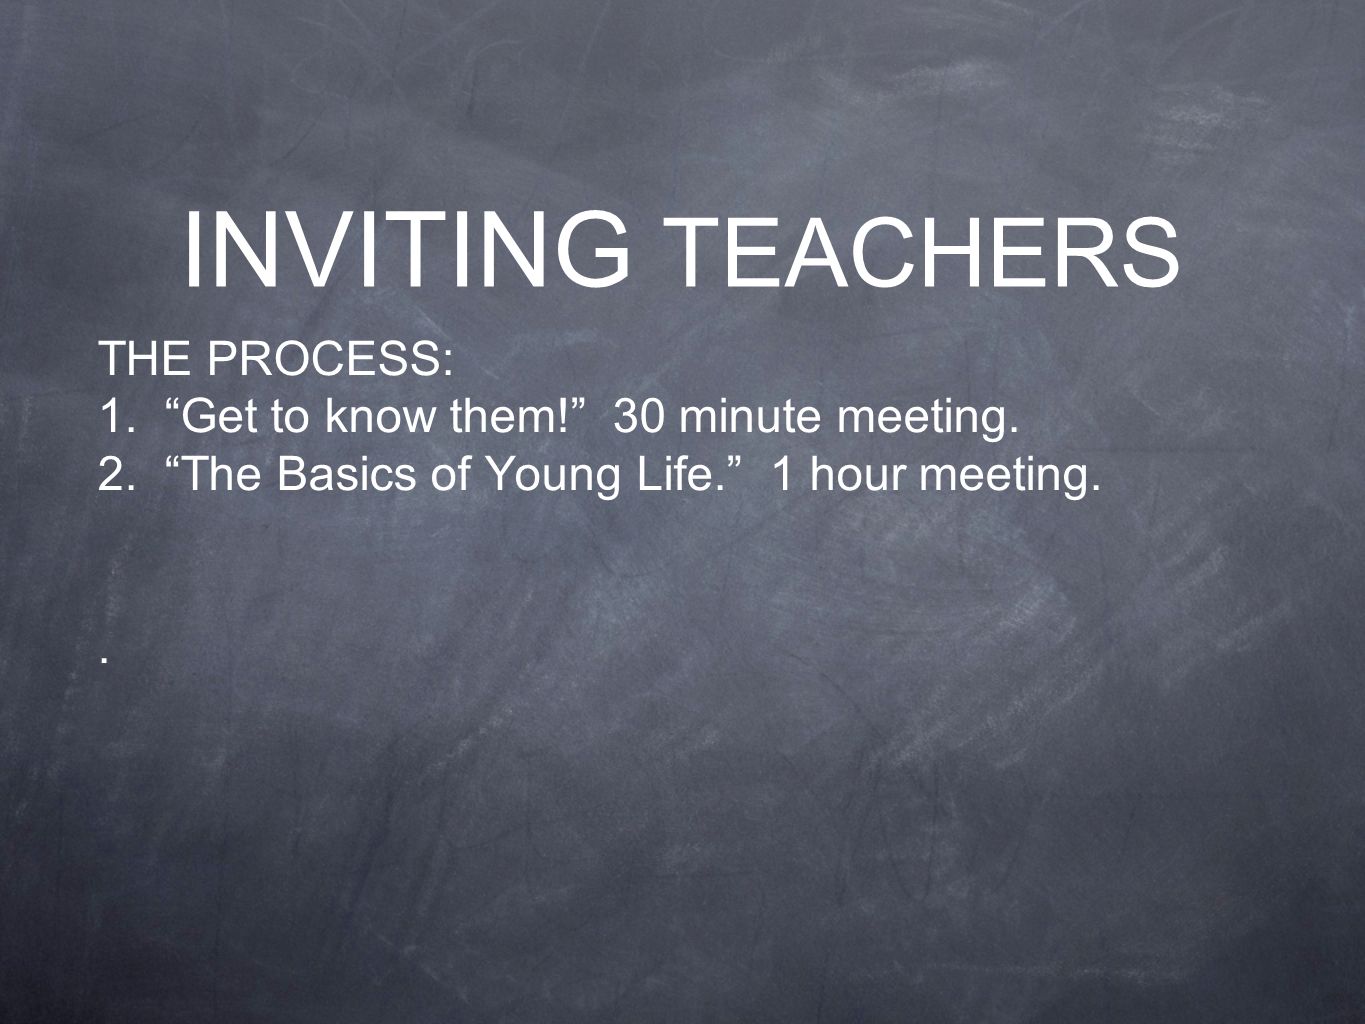 THE PROCESS: 1. Get to know them. 30 minute meeting.